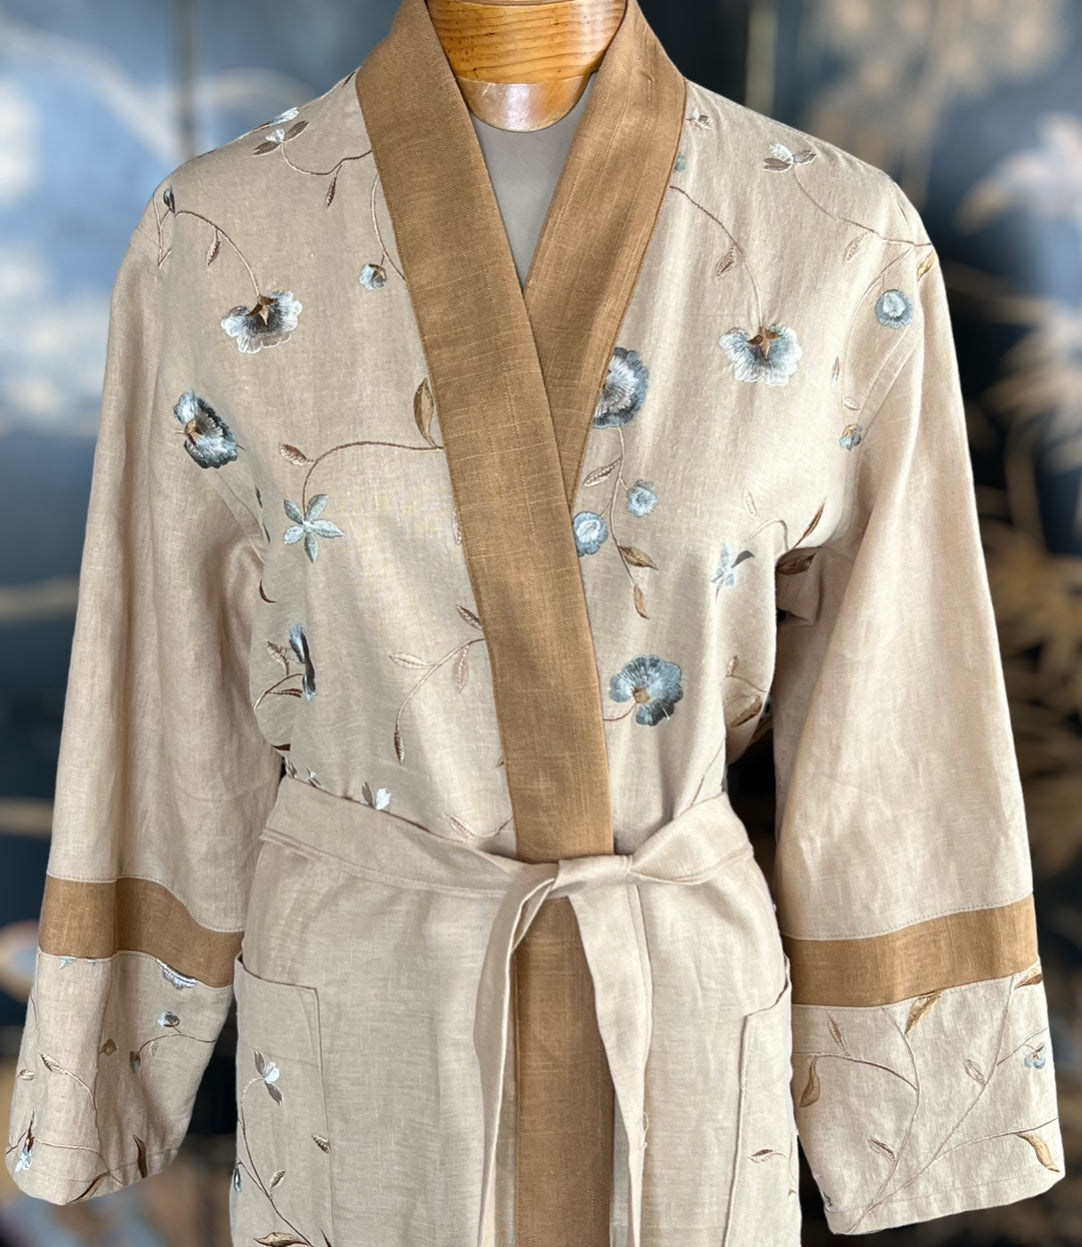 Embroidered linen robe made by Pandora's